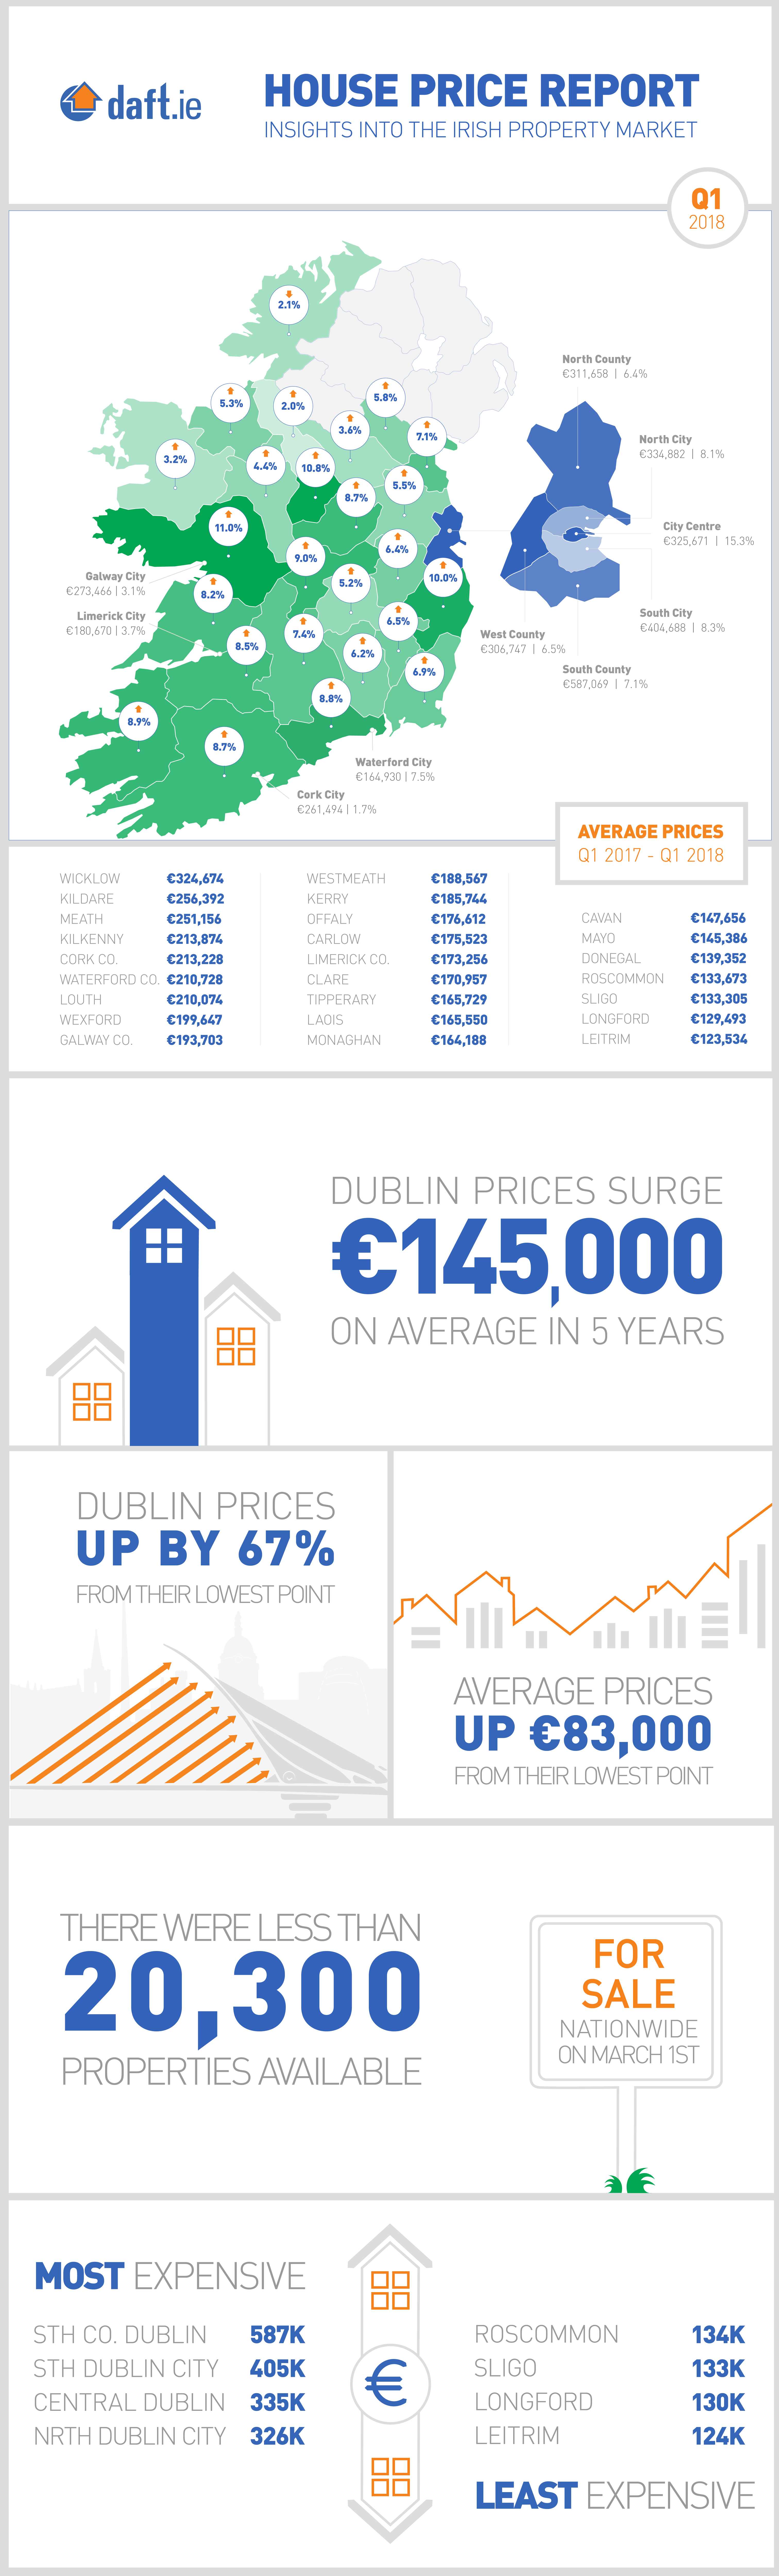 Daft.ie House Price Report: Q1 2018 Infographic